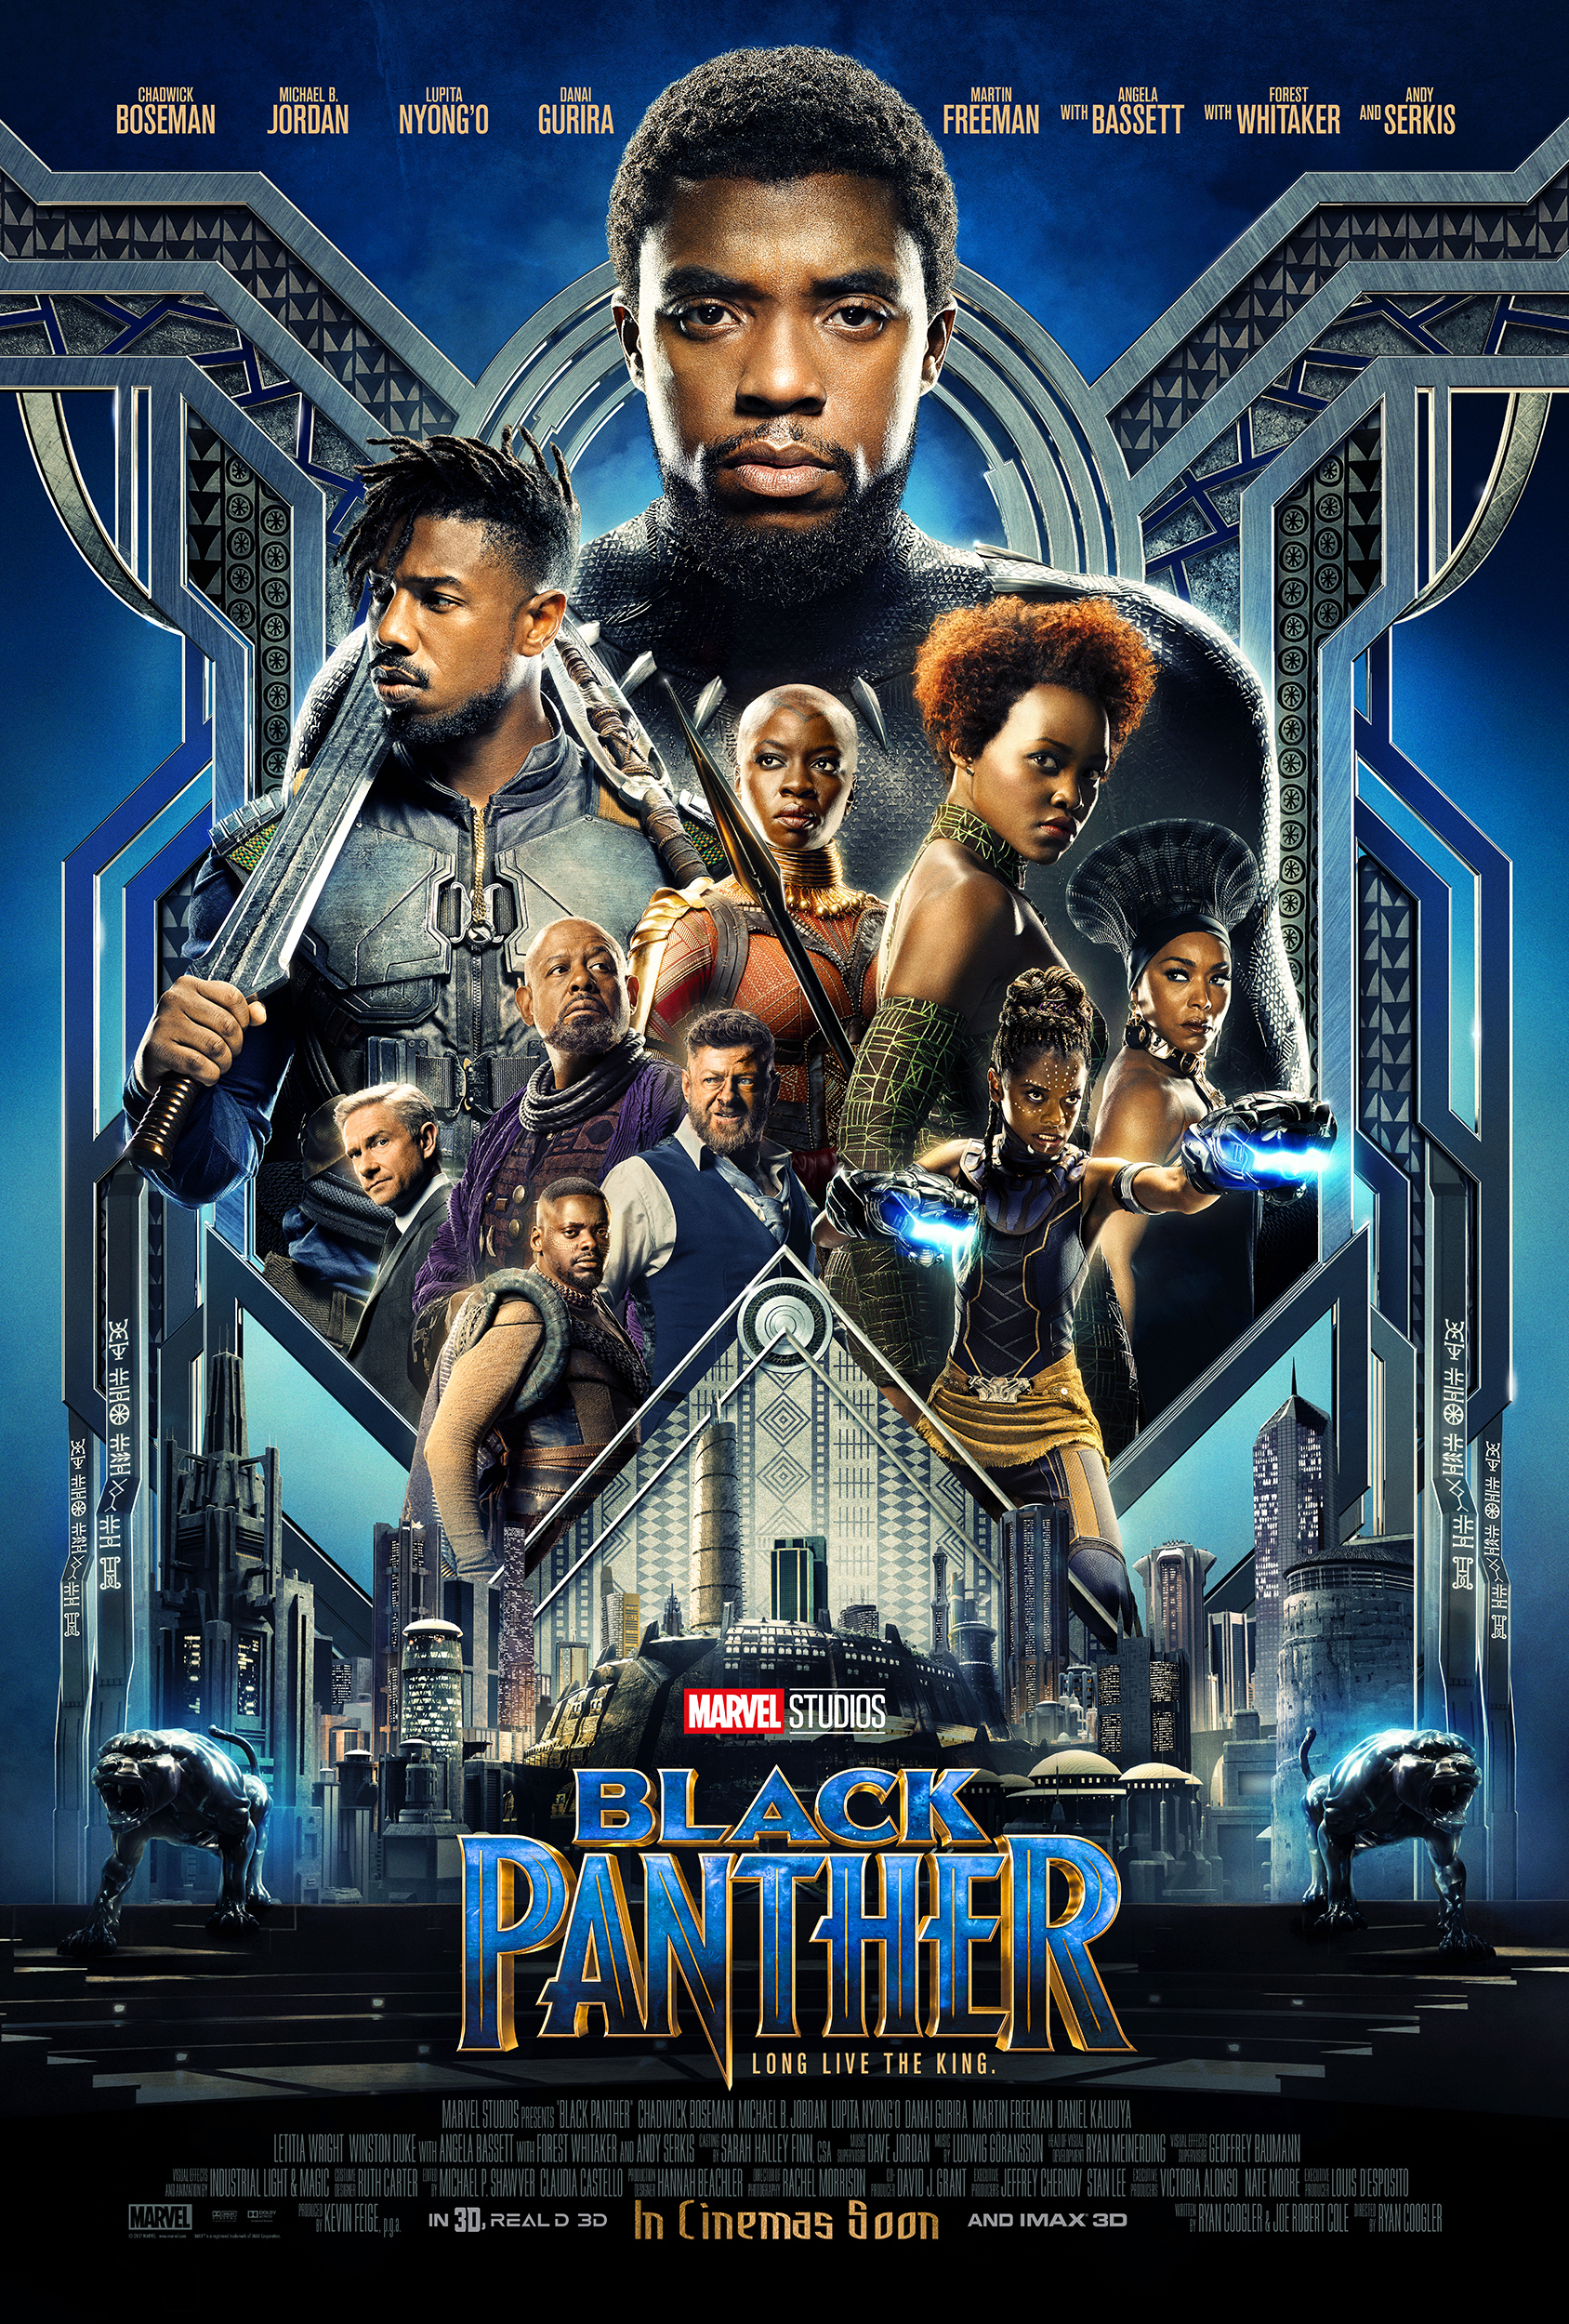 Black Panther film review: hail to the king